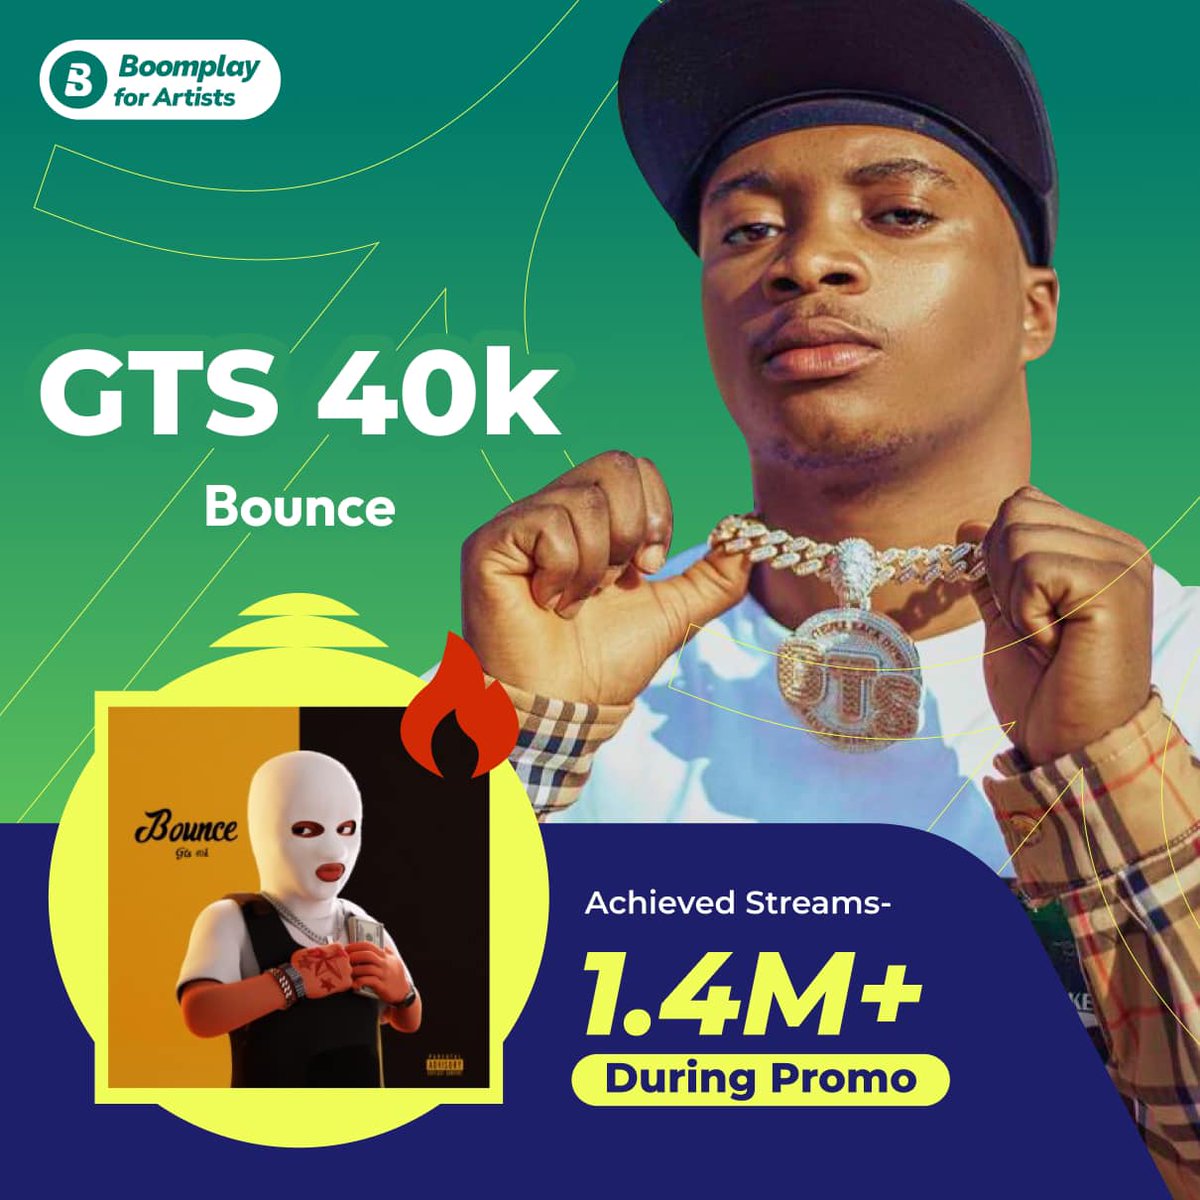 🎇Cheers to @gts40k Celebrating the incredible success of his single #Bounce, which soared to over 1.4M streams during the promo!  Let's keep the party going strong with Boomplay! 🎵

#GTS40k #Bounce #Boomplay #BoomplayForArtists #MusicPromotion #ArtistPromotion